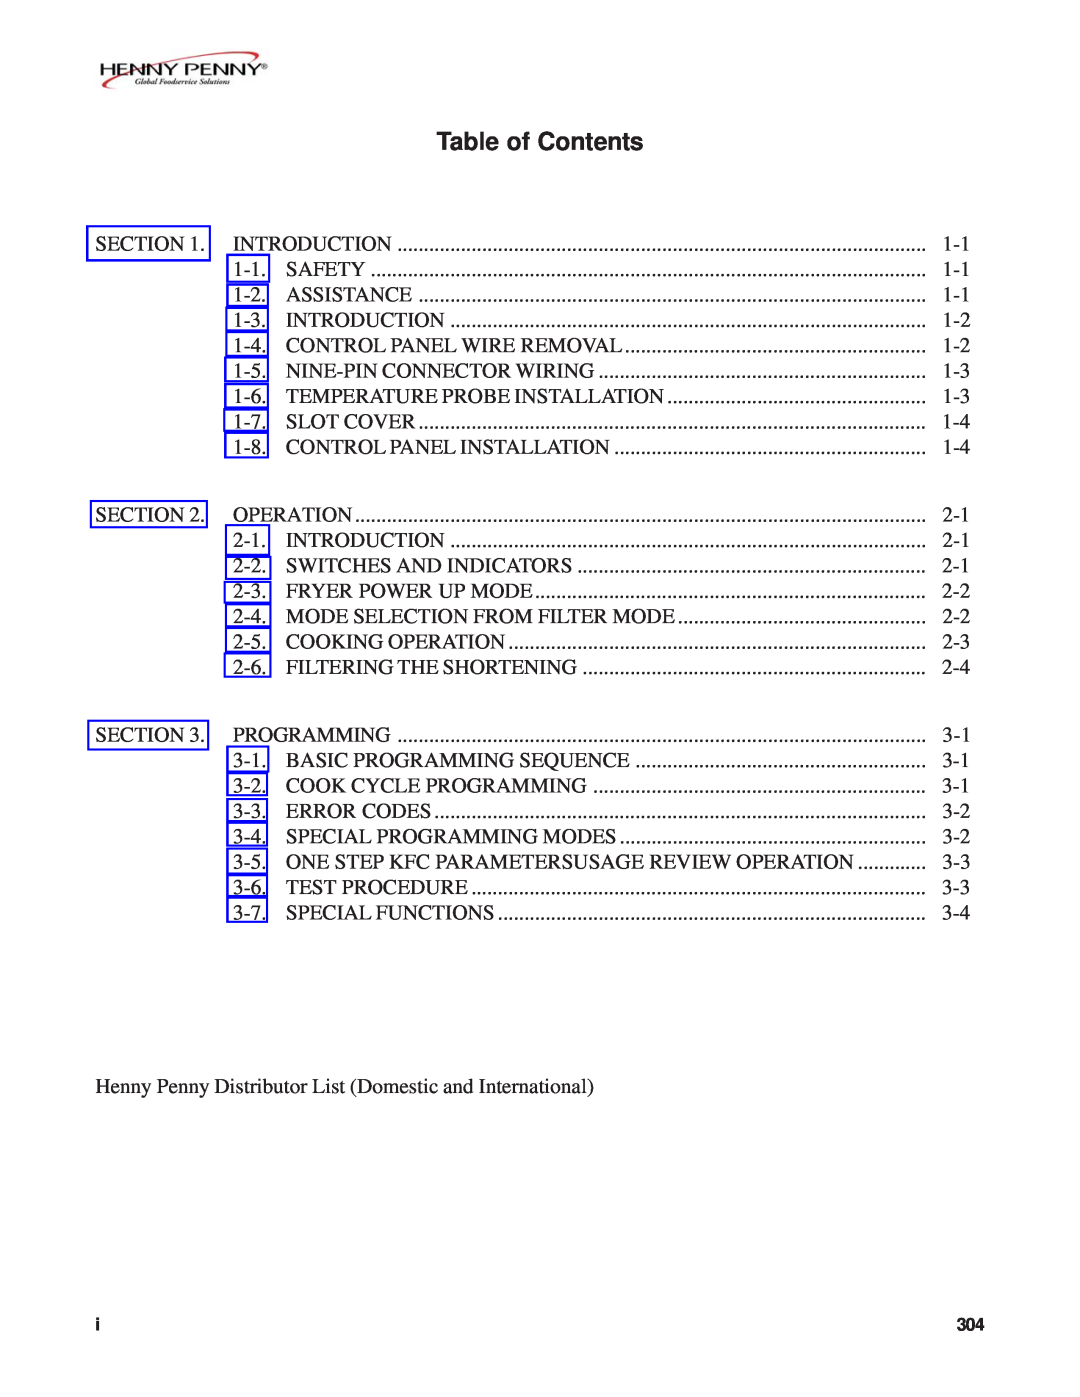 Henny Penny FM07-020-F manual Table of Contents 